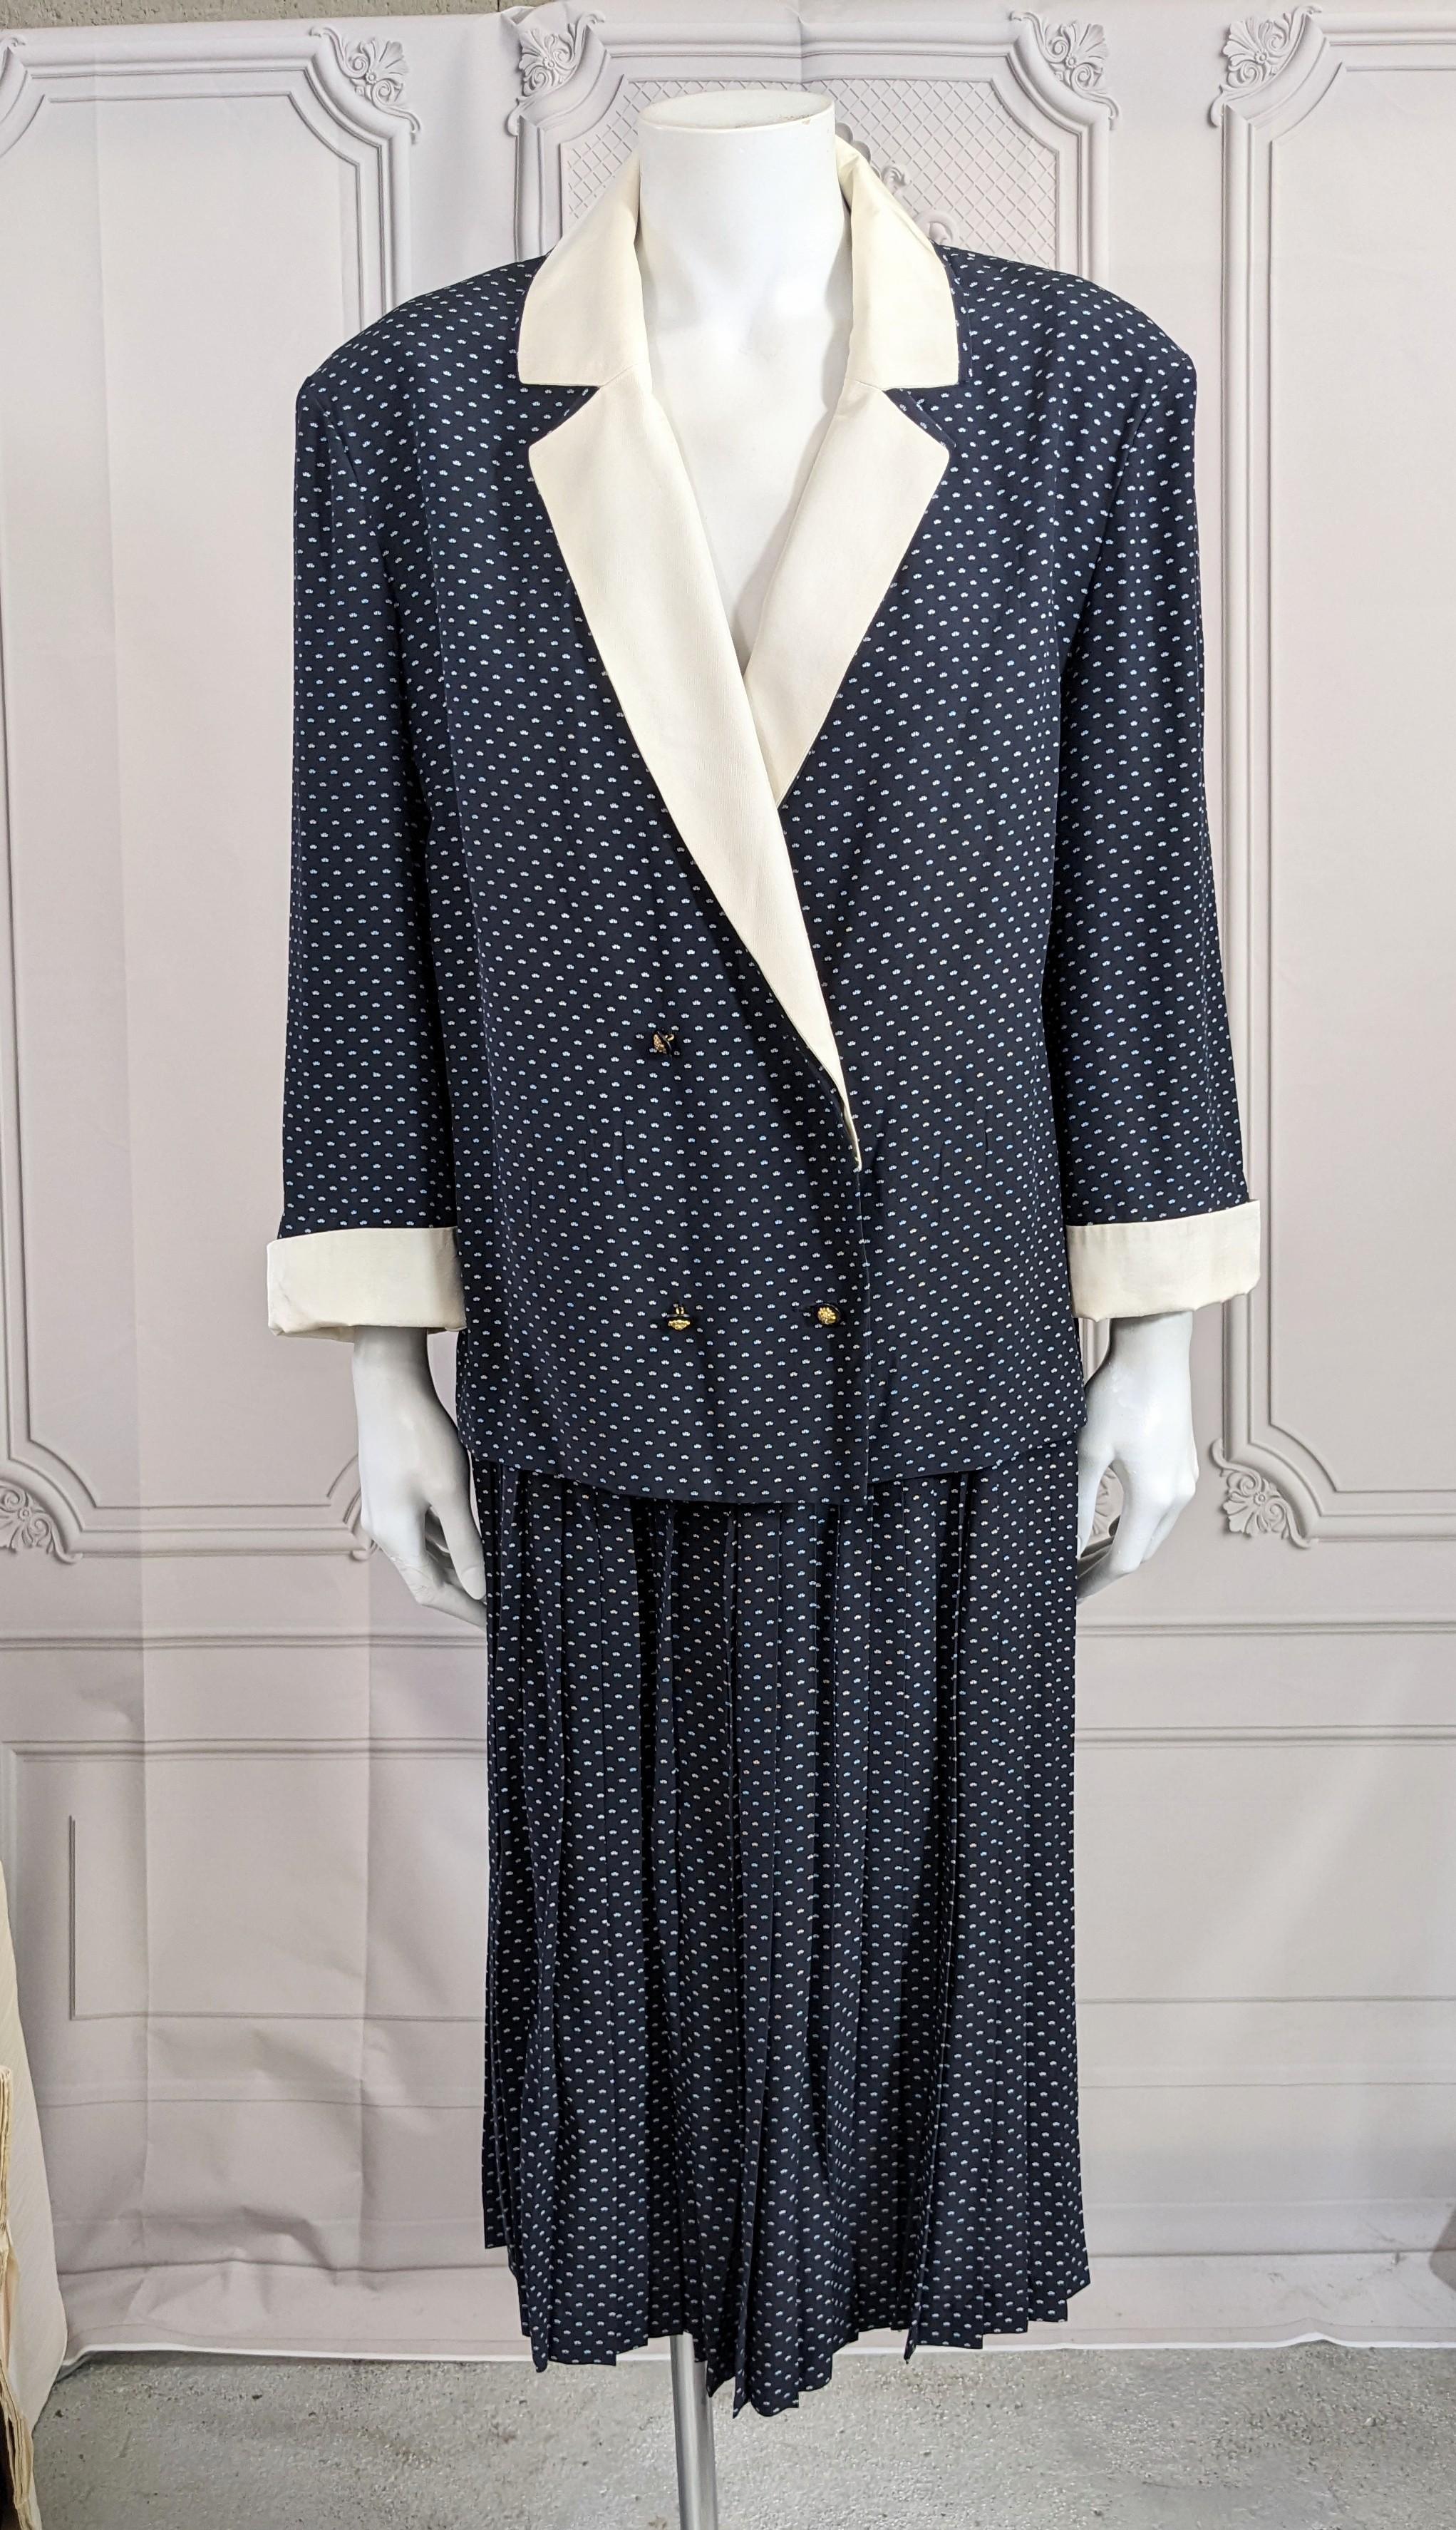 Classic and Elegant Chanel Navy Silk Crepe Skirt Suit with knife pleated skirt from the early 1980's. Unstructured boxy blazer with shoulder pads and 3/4 sleeves made of printed silk crepe and white silk twill fits like a soft shirt.
Jacket is